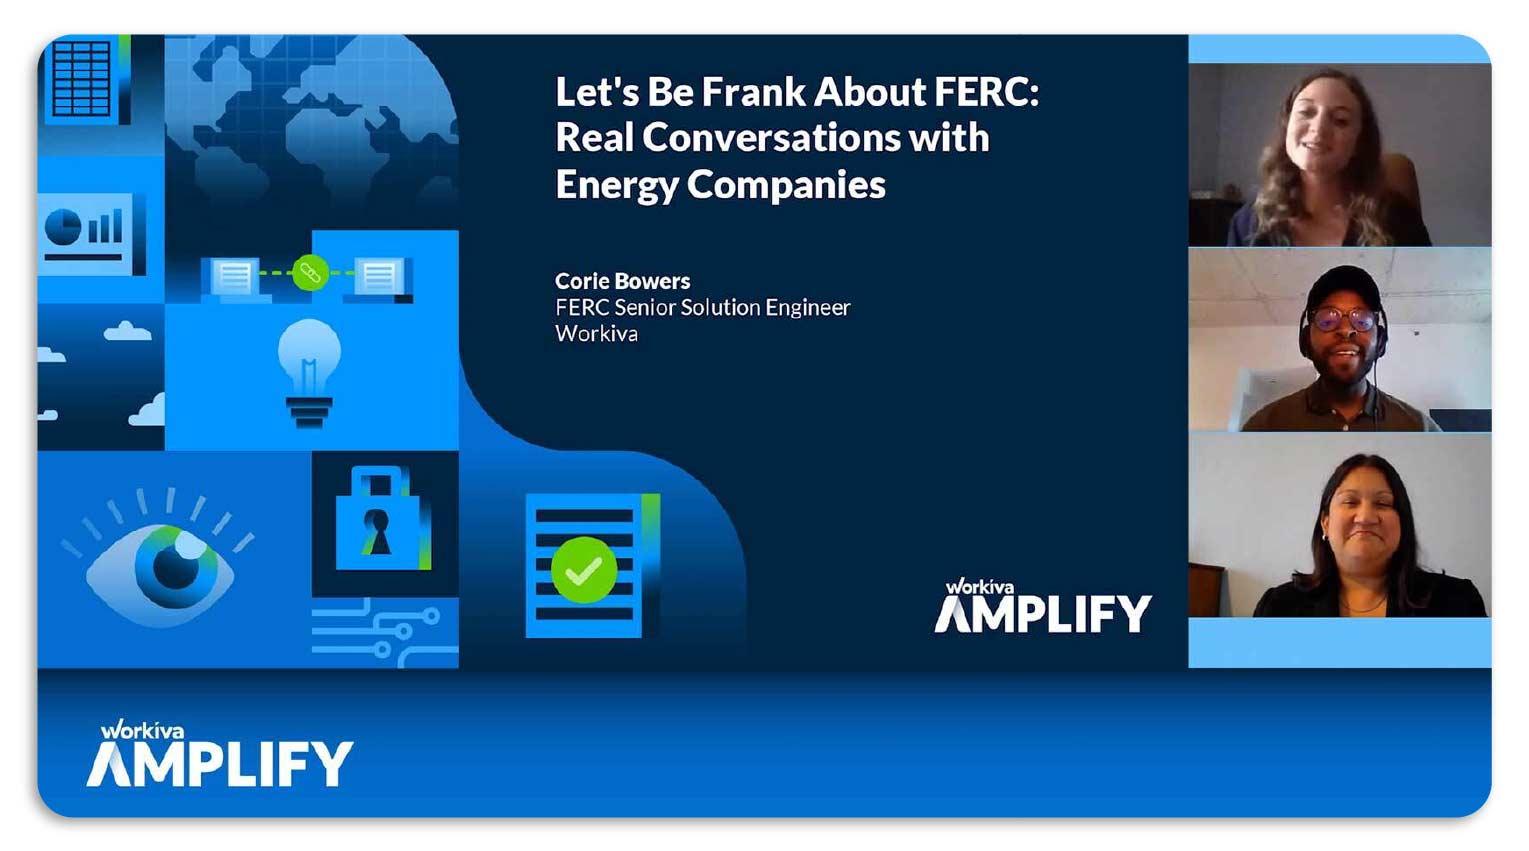 Presentation slide for session named "Let's Be Frank About FERC: Real Conversations with Energy Companies"